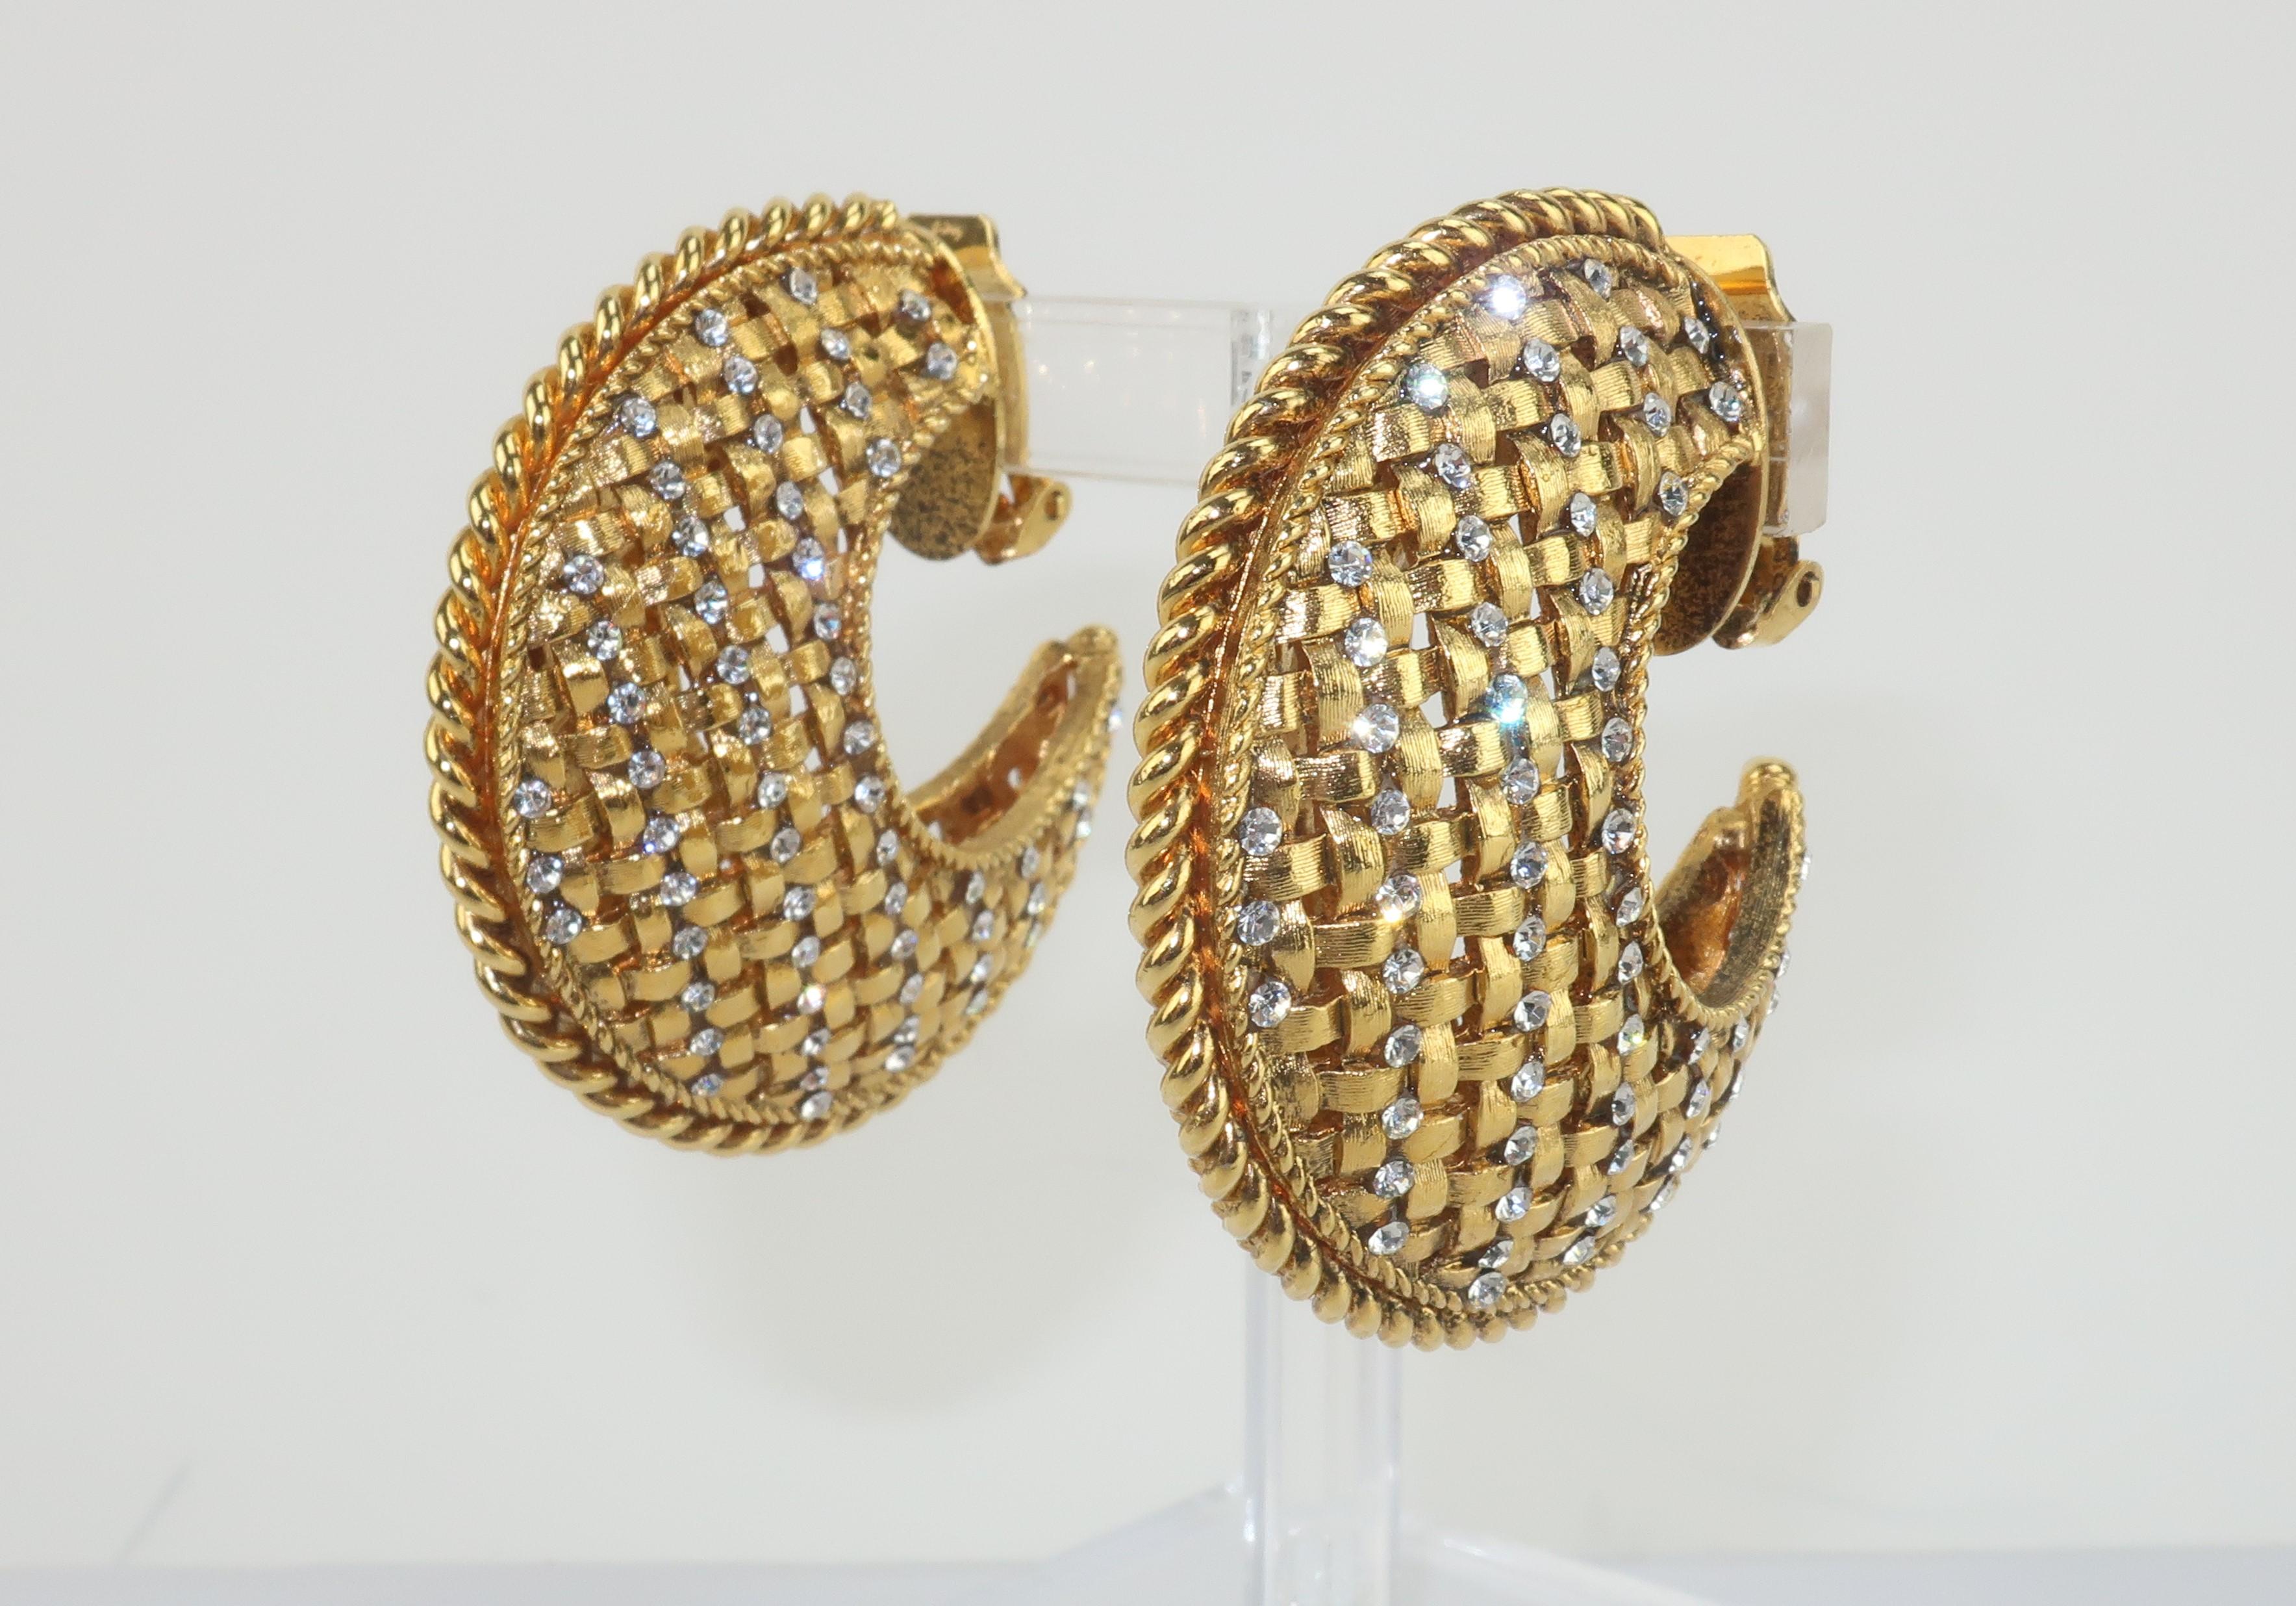 Large 1980's crescent shaped hoop earrings with a beautifully detailed gold tone lattice pattern accented by crystal rhinestones.  Outfitted with clip on hardware.  Unsigned though made with quality details and a statement making style.  From the